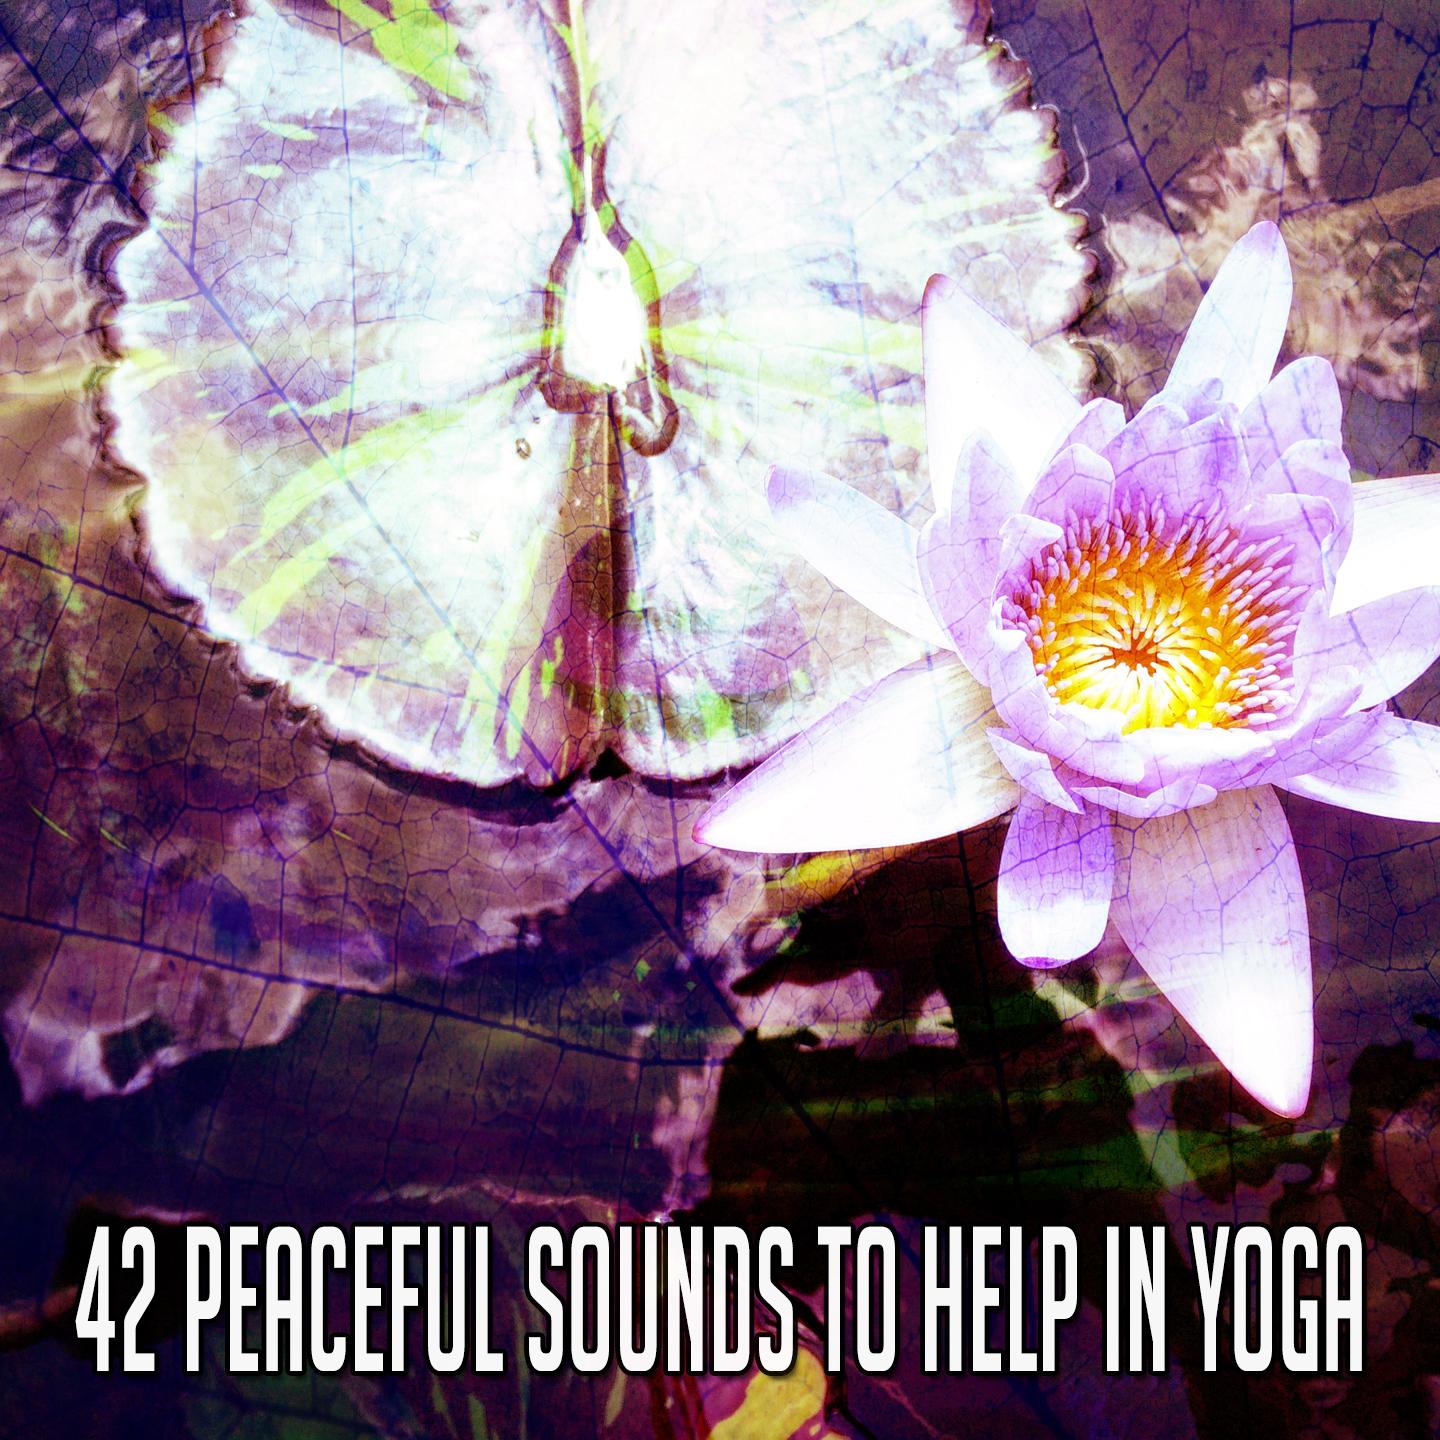 42 Peaceful Sounds to Help in Yoga